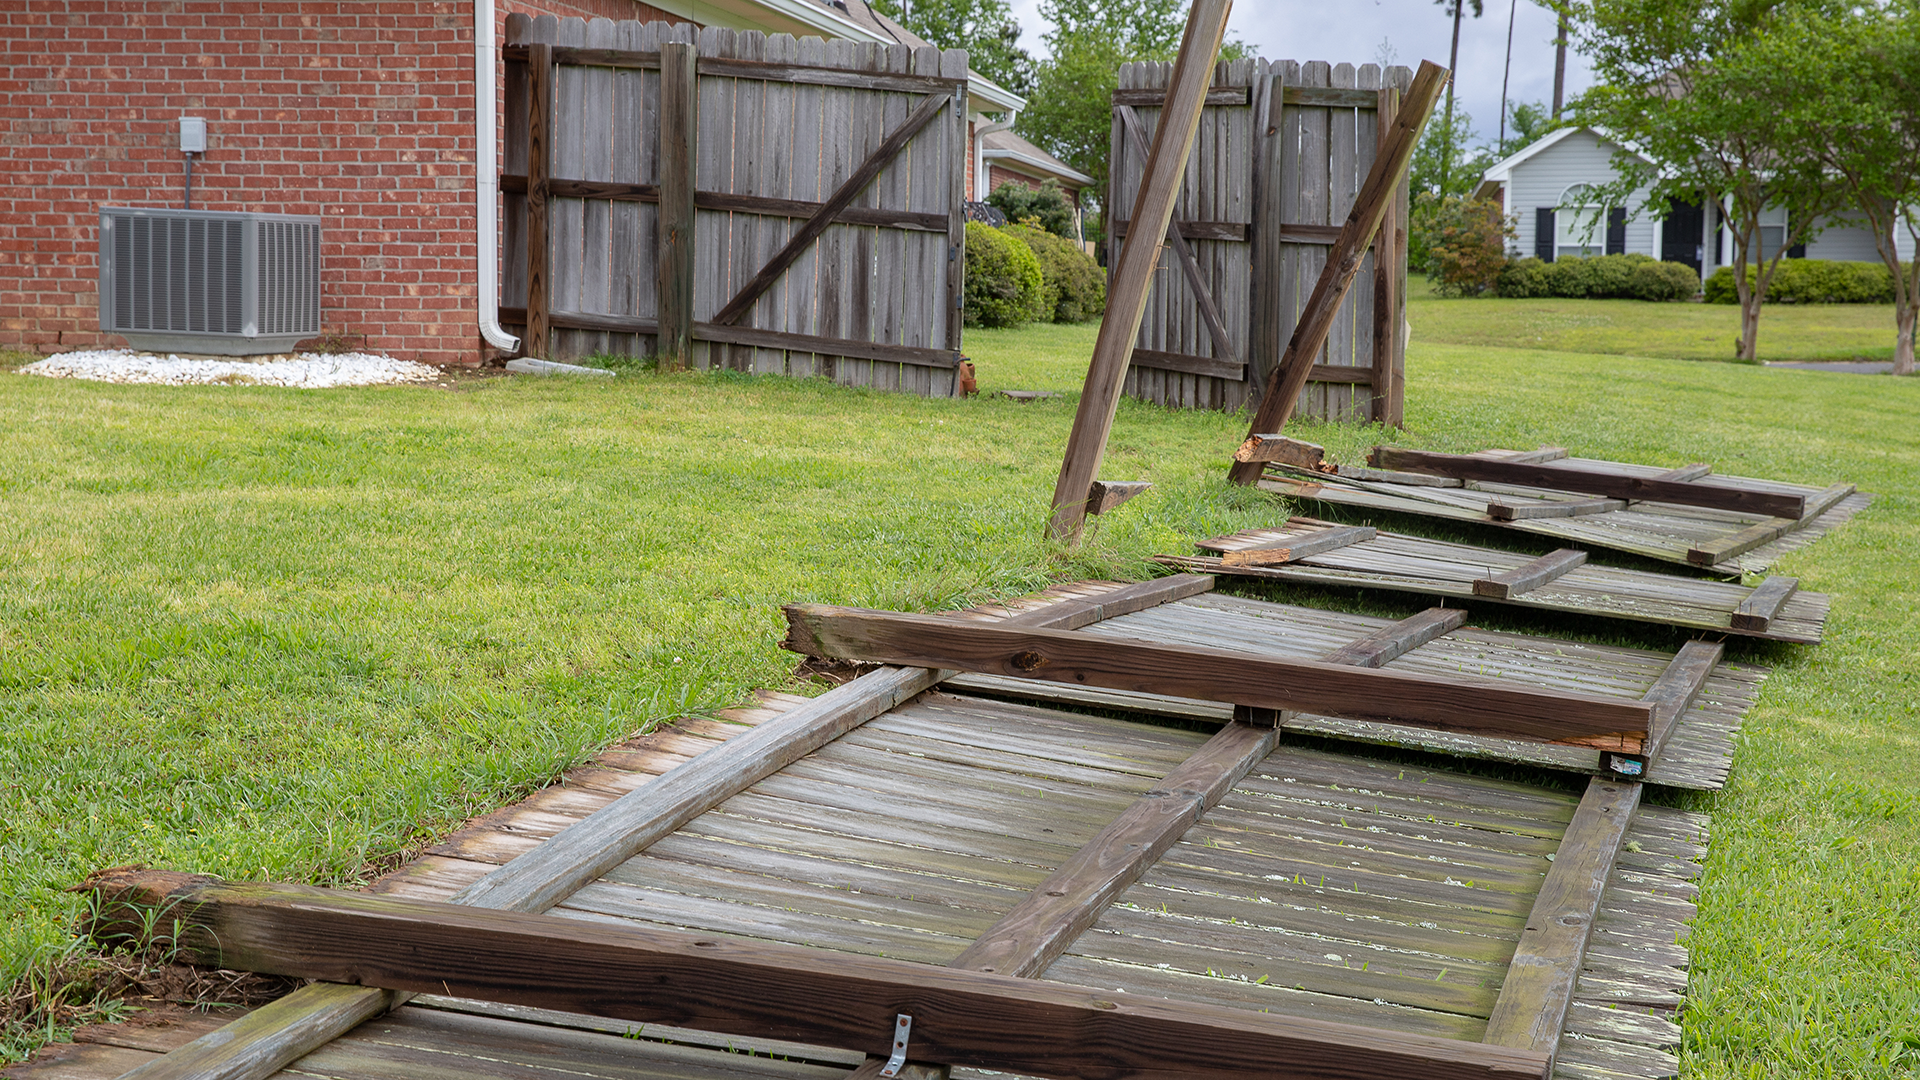 Featured image for “The Impact of High Winds and Hail on Your Yard’s Fencing: A Guide by Renner Inspection Services”